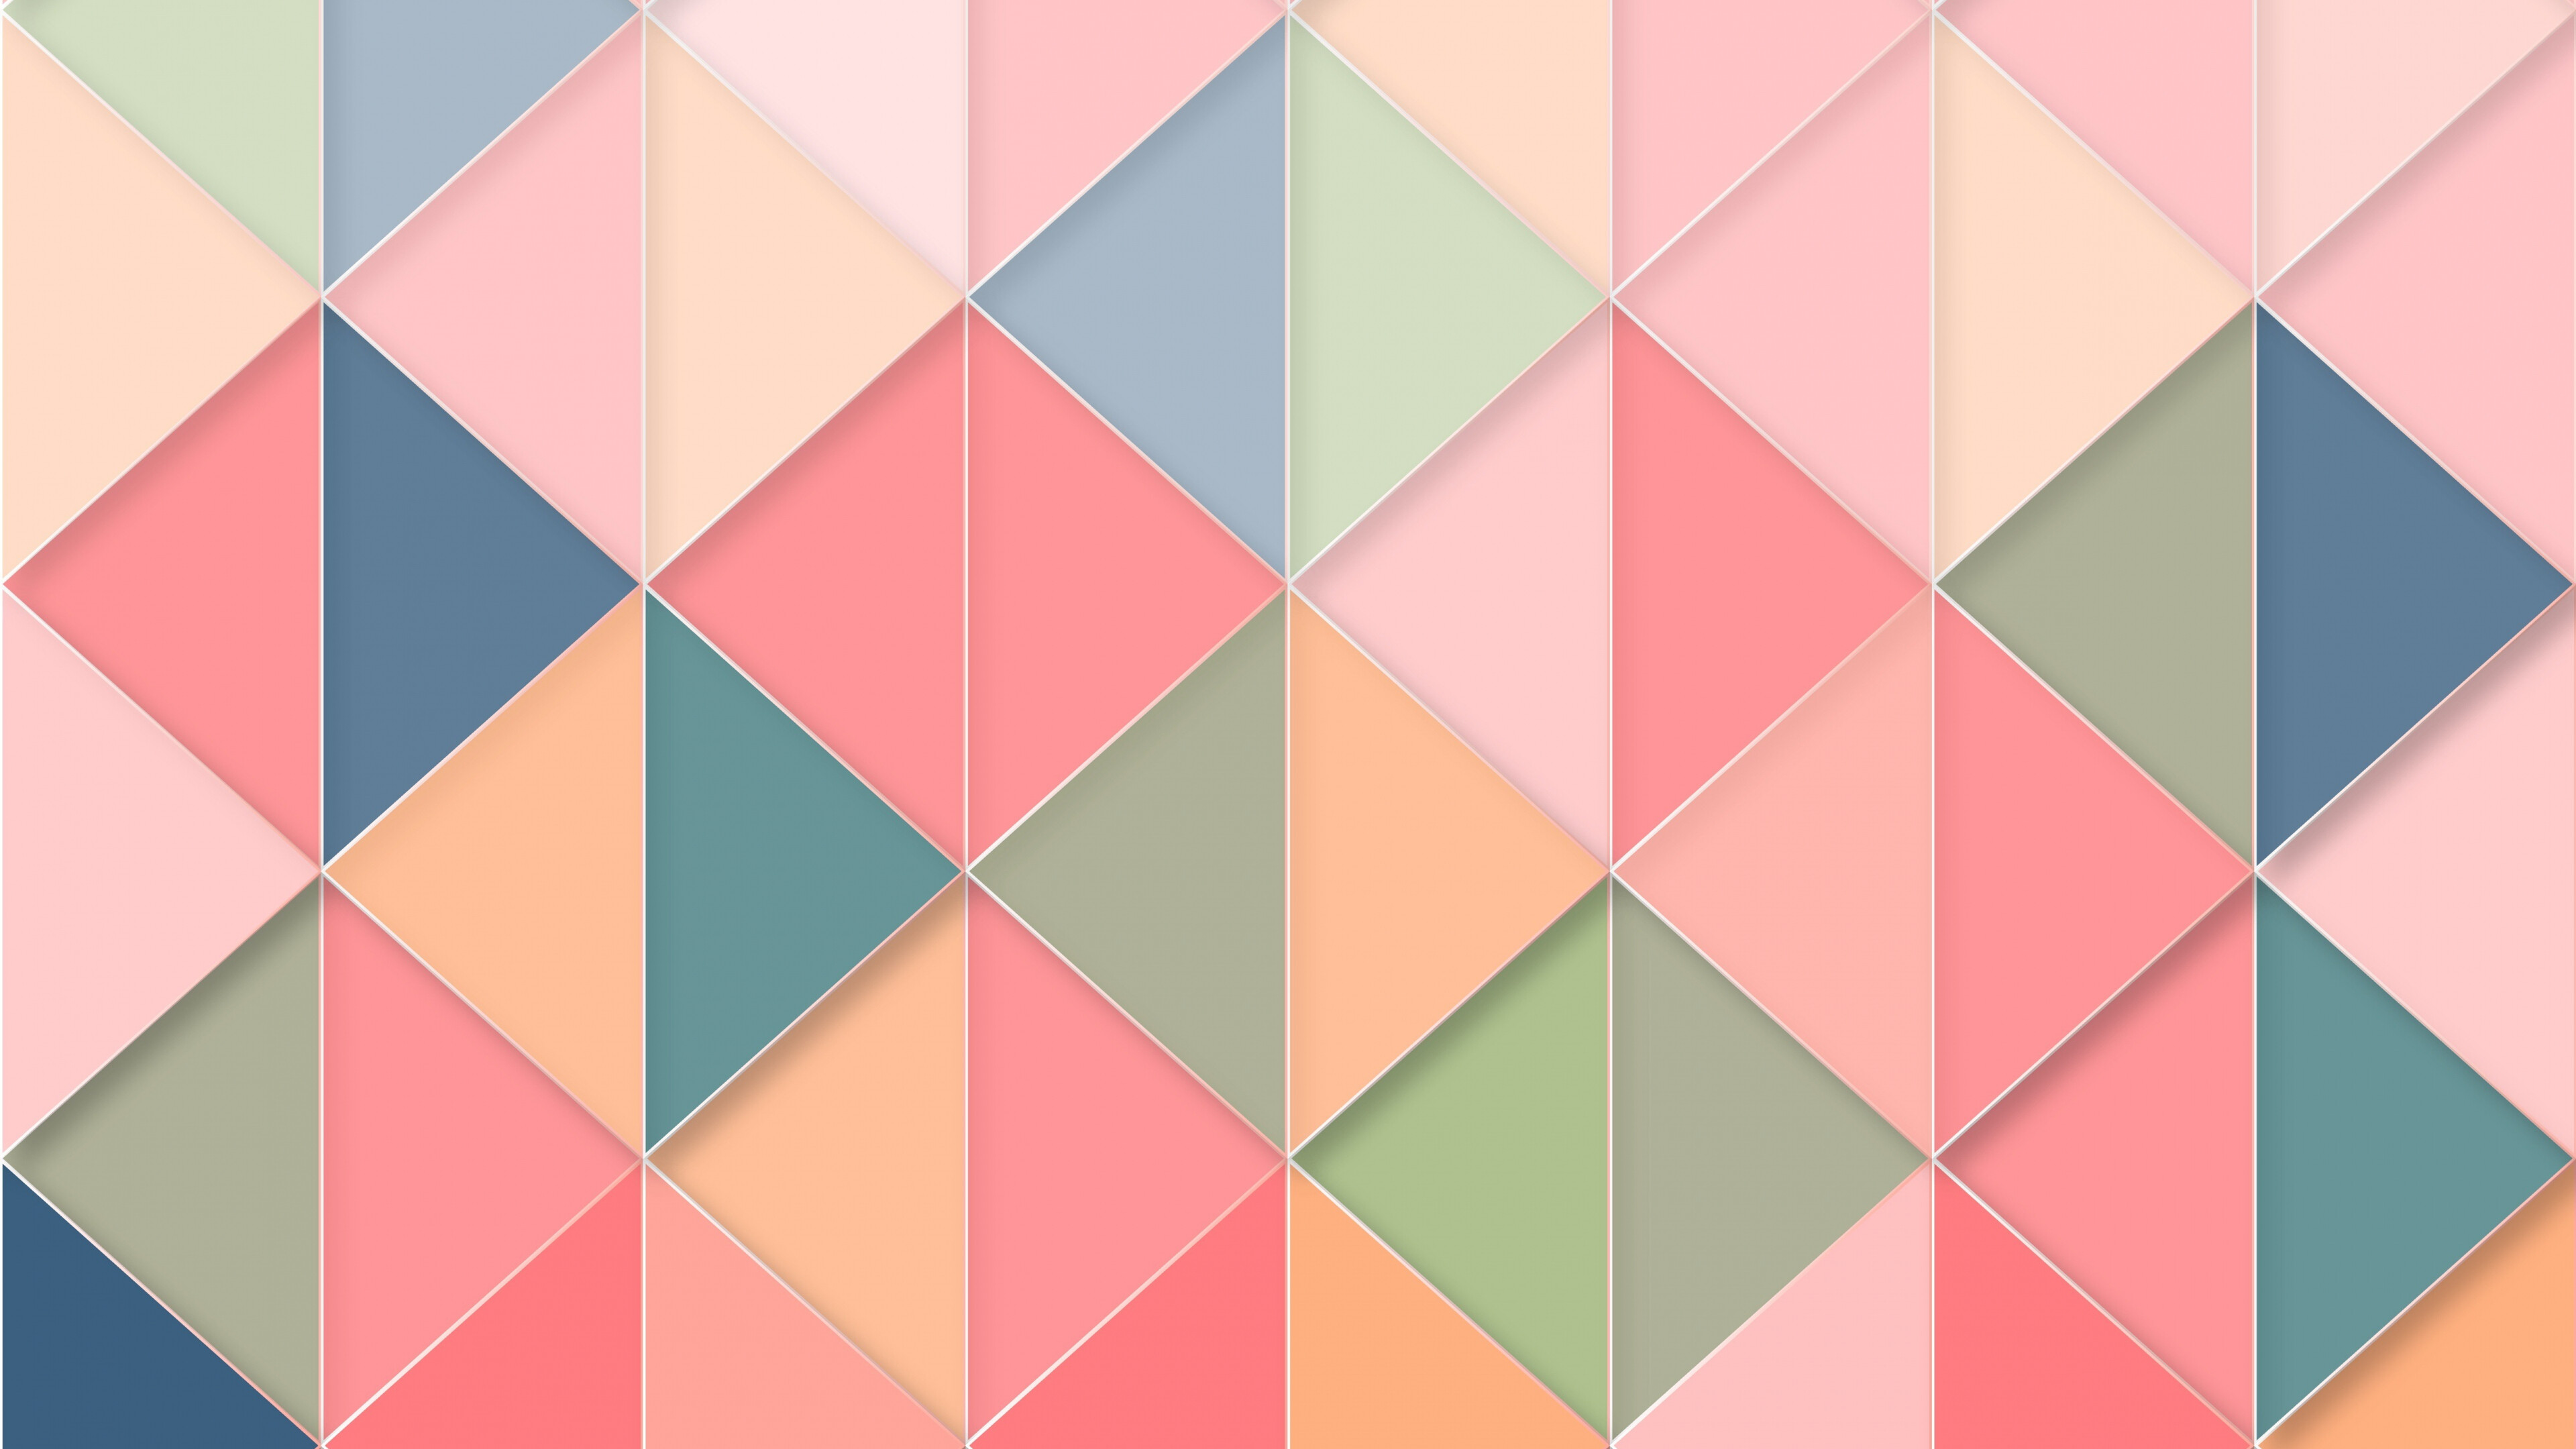 Geometric Abstract: Obtuse angled triangles, Rhombus, Squares, Multicolored. 3840x2160 4K Background.